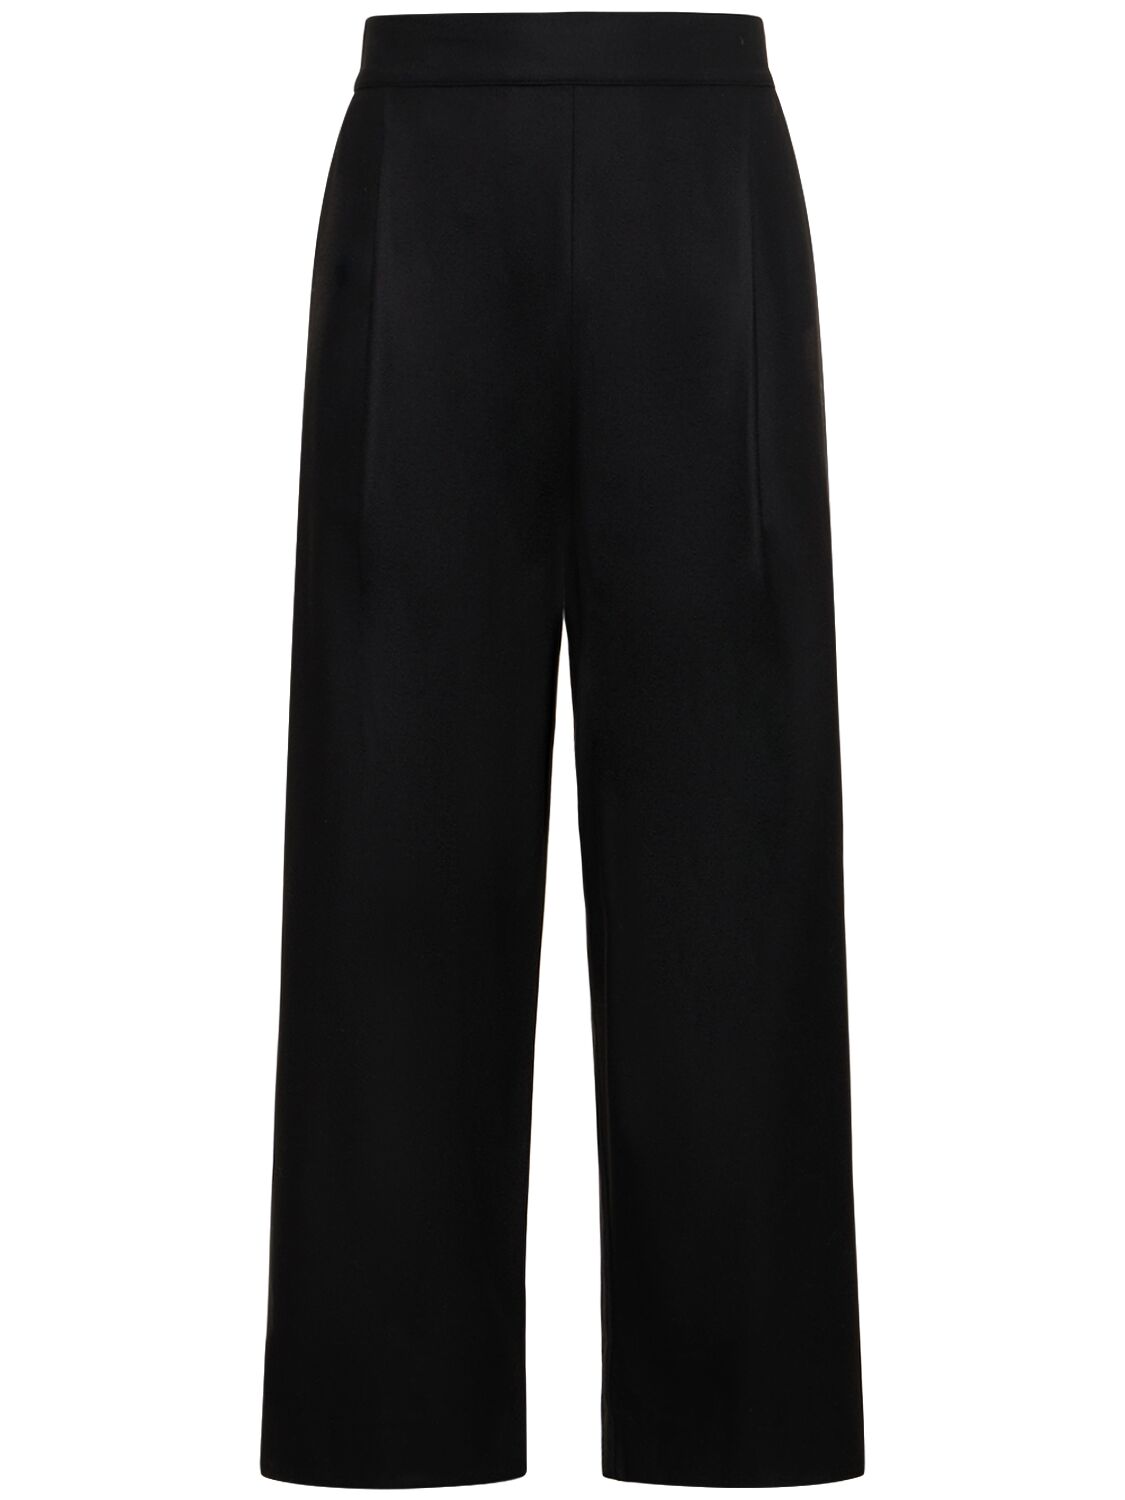 LANEUS BUGGIE UNITO WOOL BLEND trousers